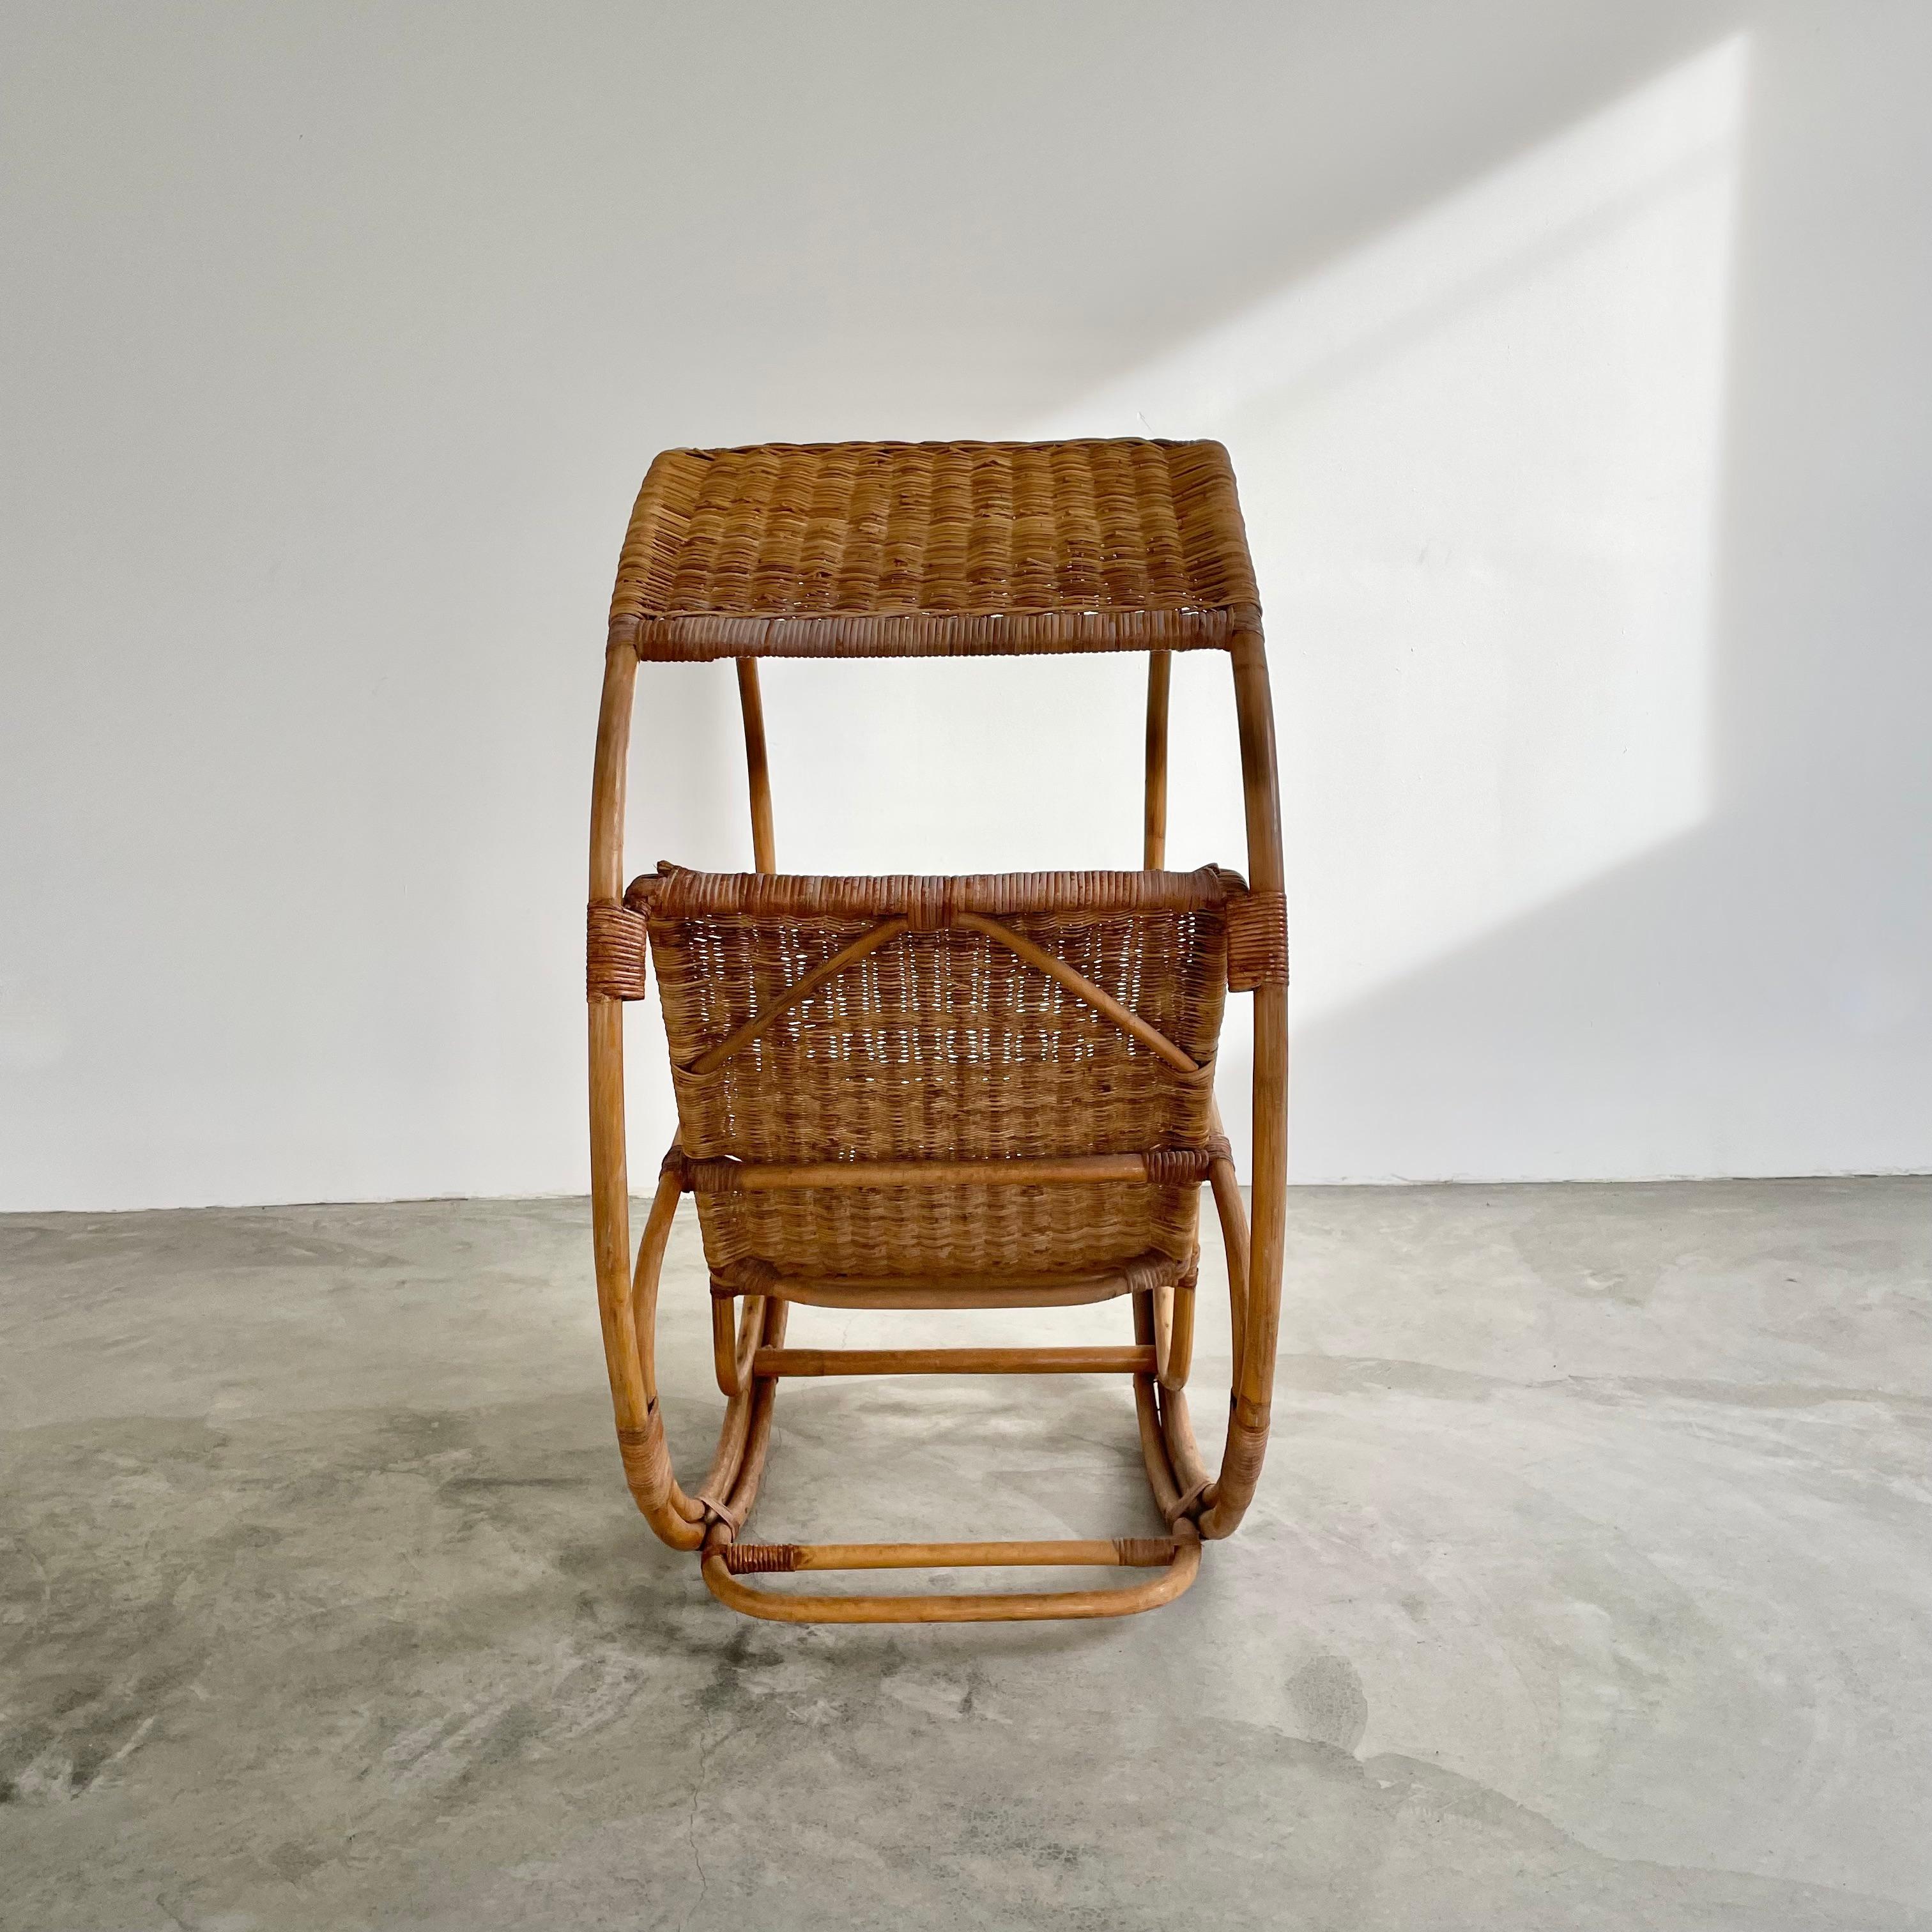 Bonacina style Italian Rattan Rocking Chair, 1960s Italy In Good Condition For Sale In Los Angeles, CA